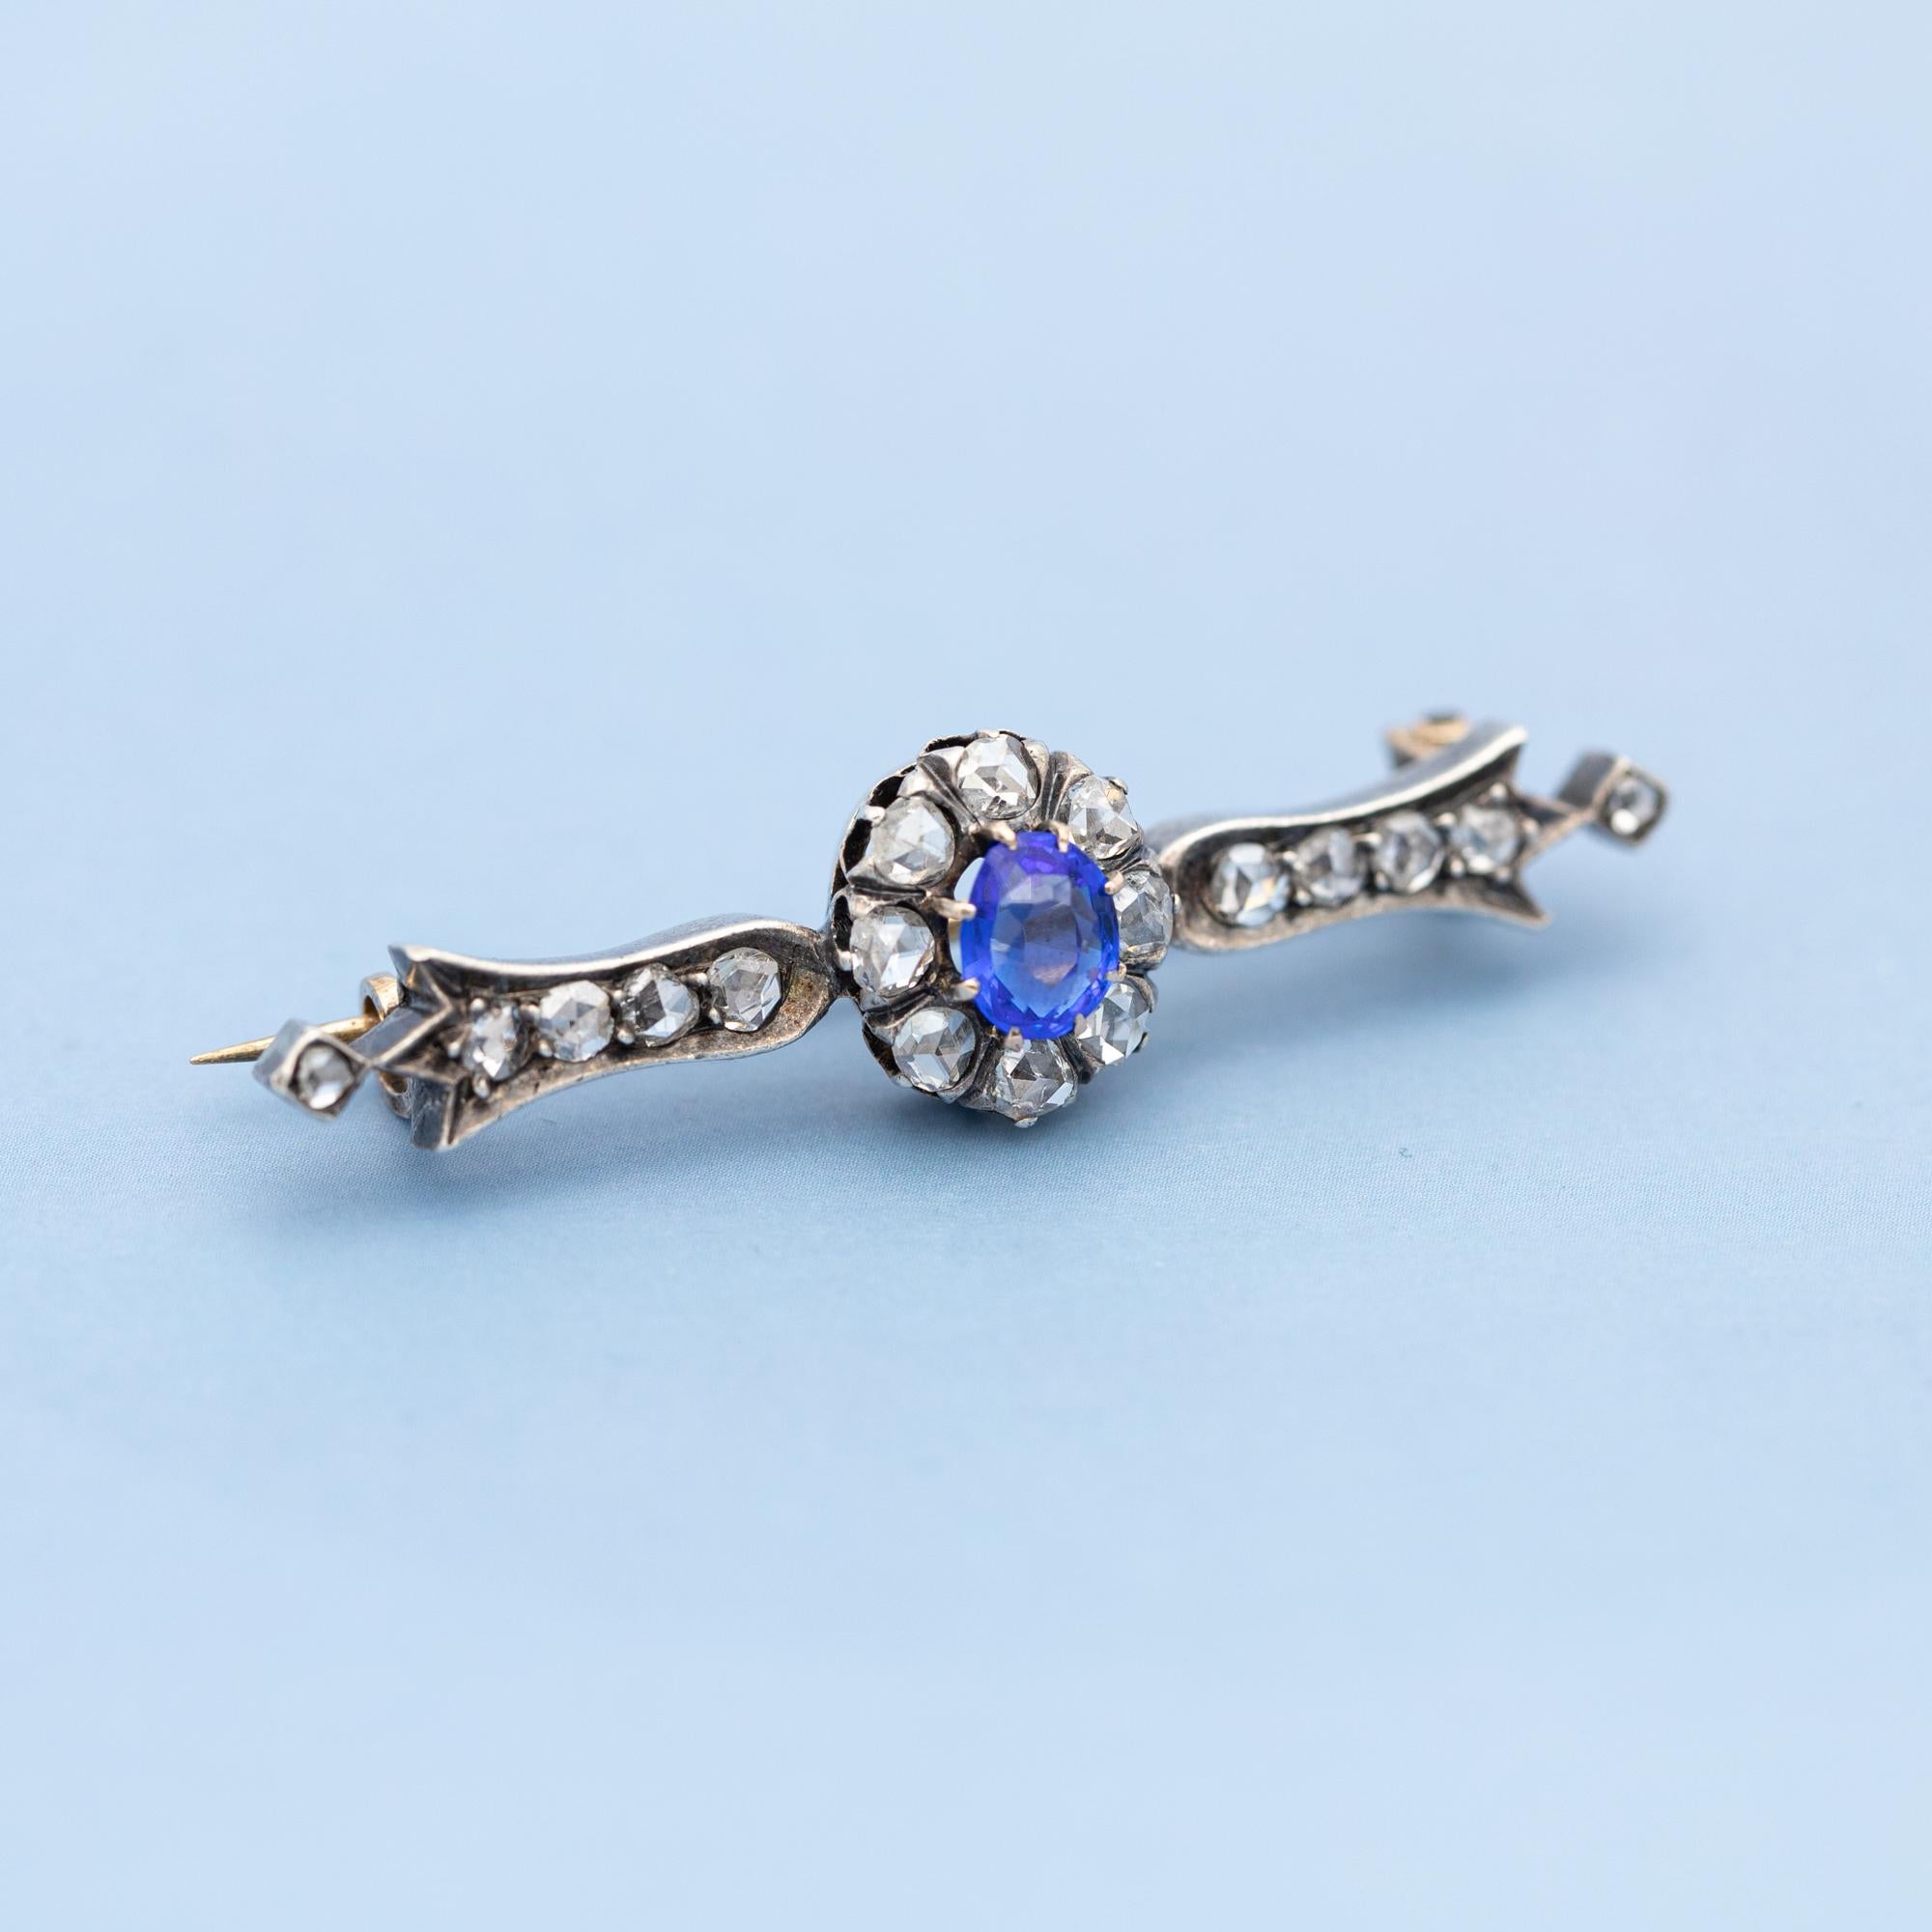 Wonderful French antique bar brooch - Victorian - rose cut diamonds & sapphire For Sale 6